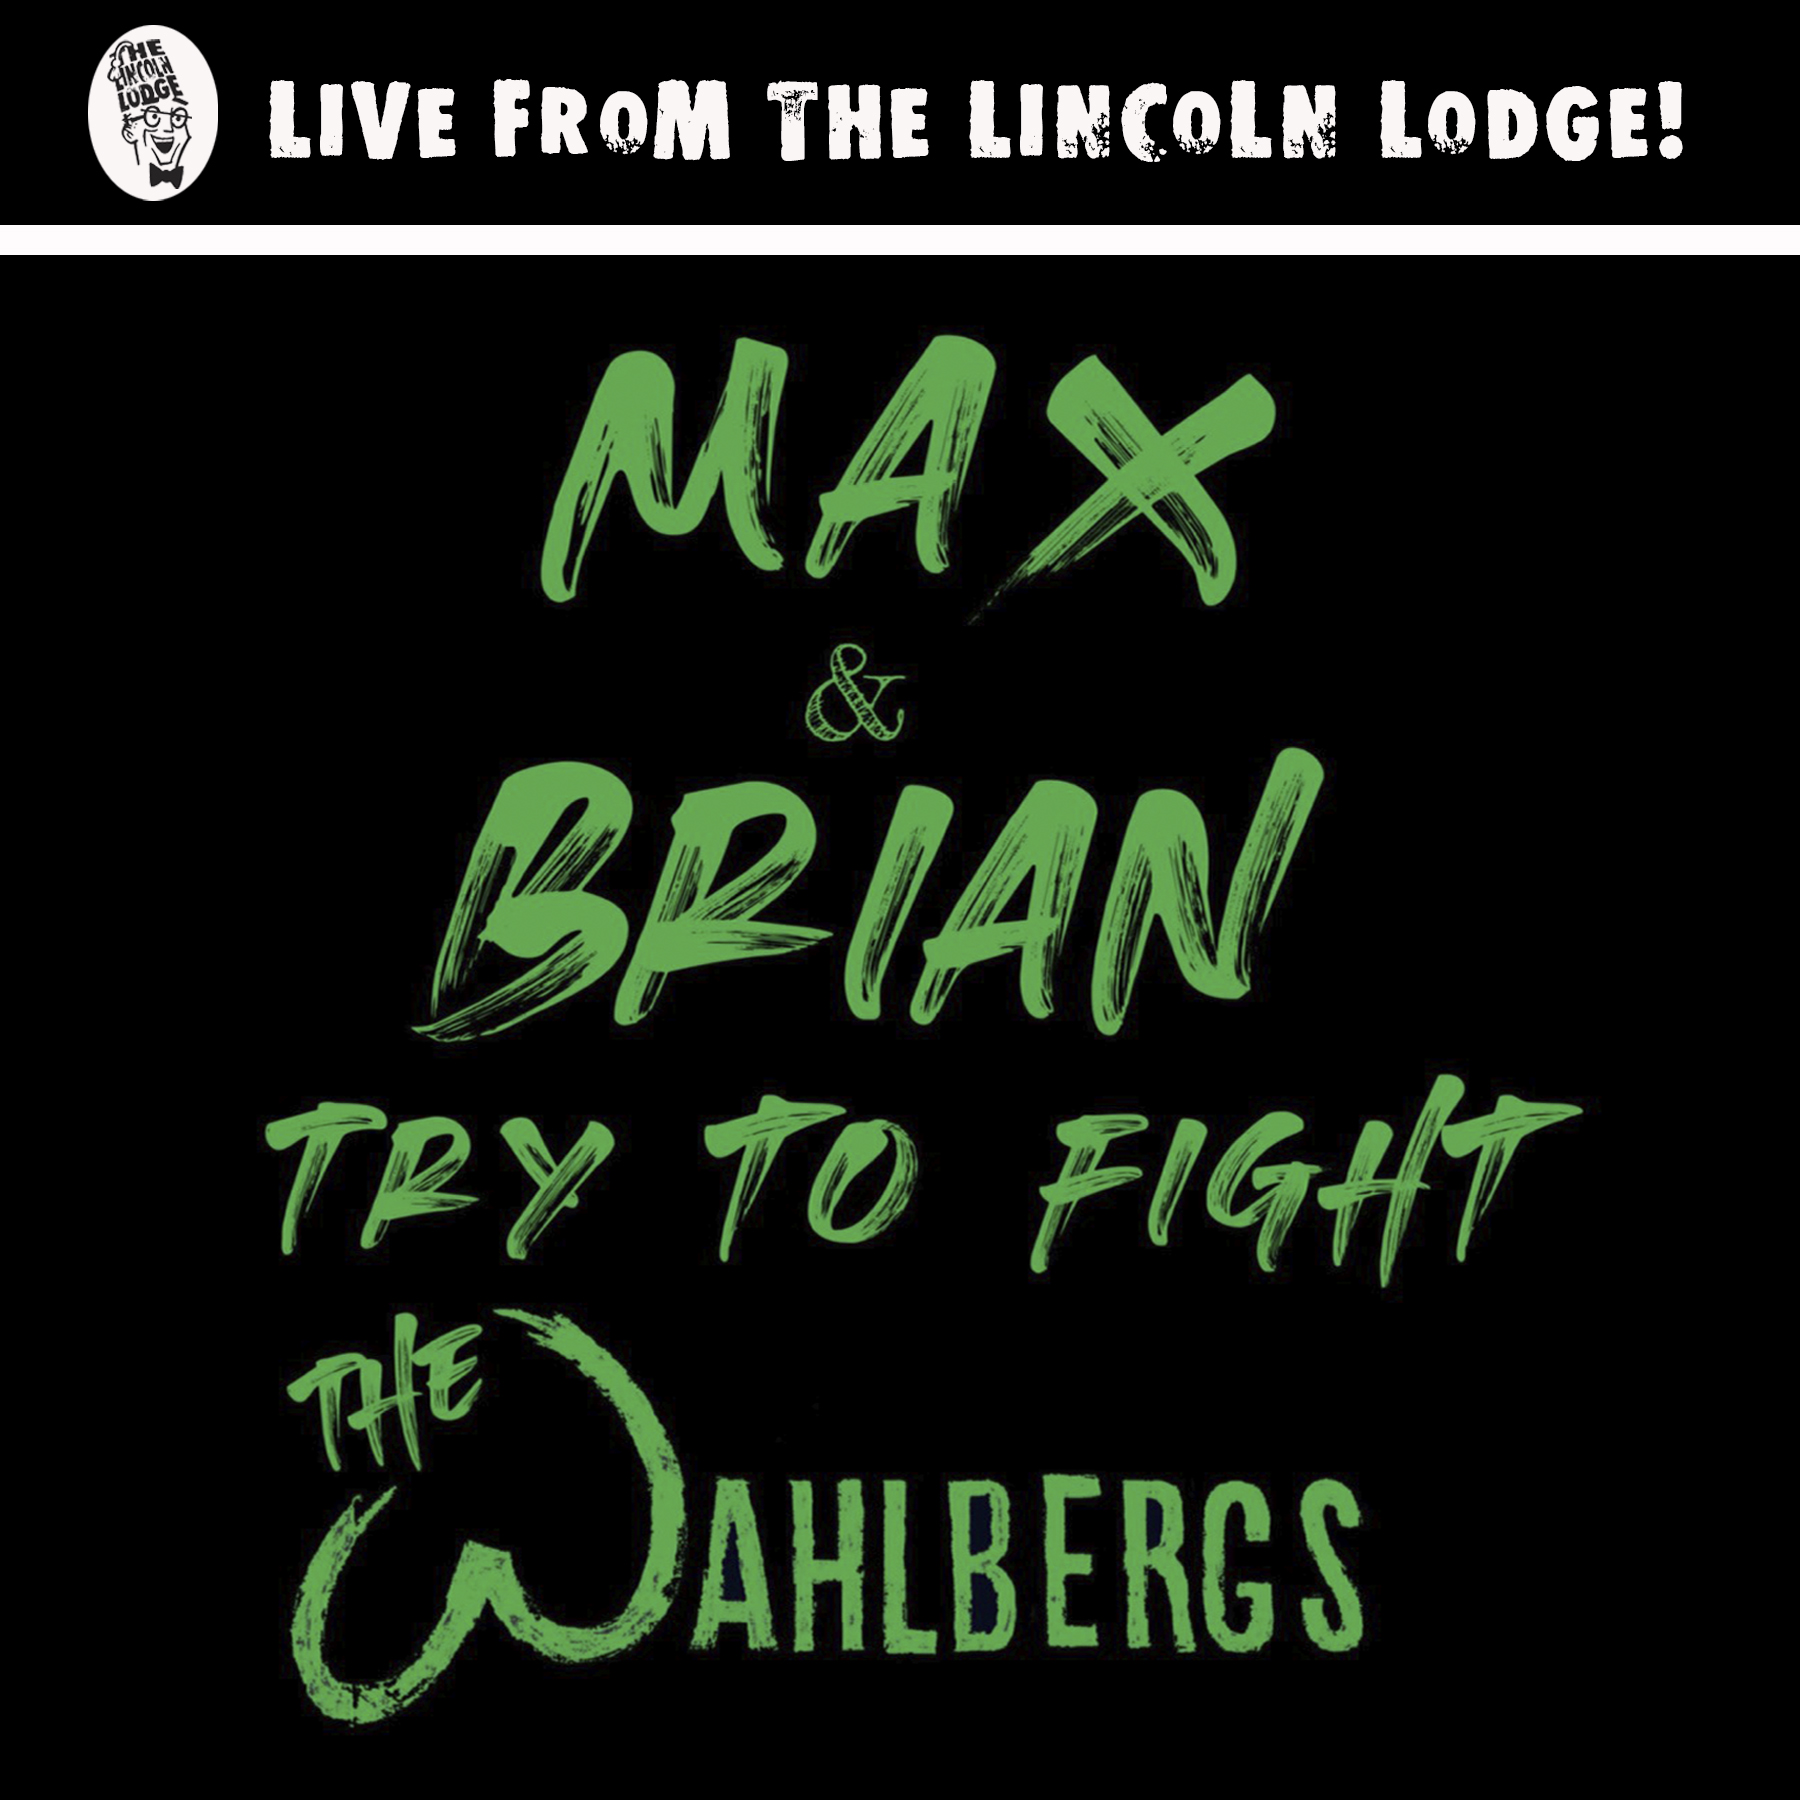 Max & Brian Try To Fight The Wahlbergs